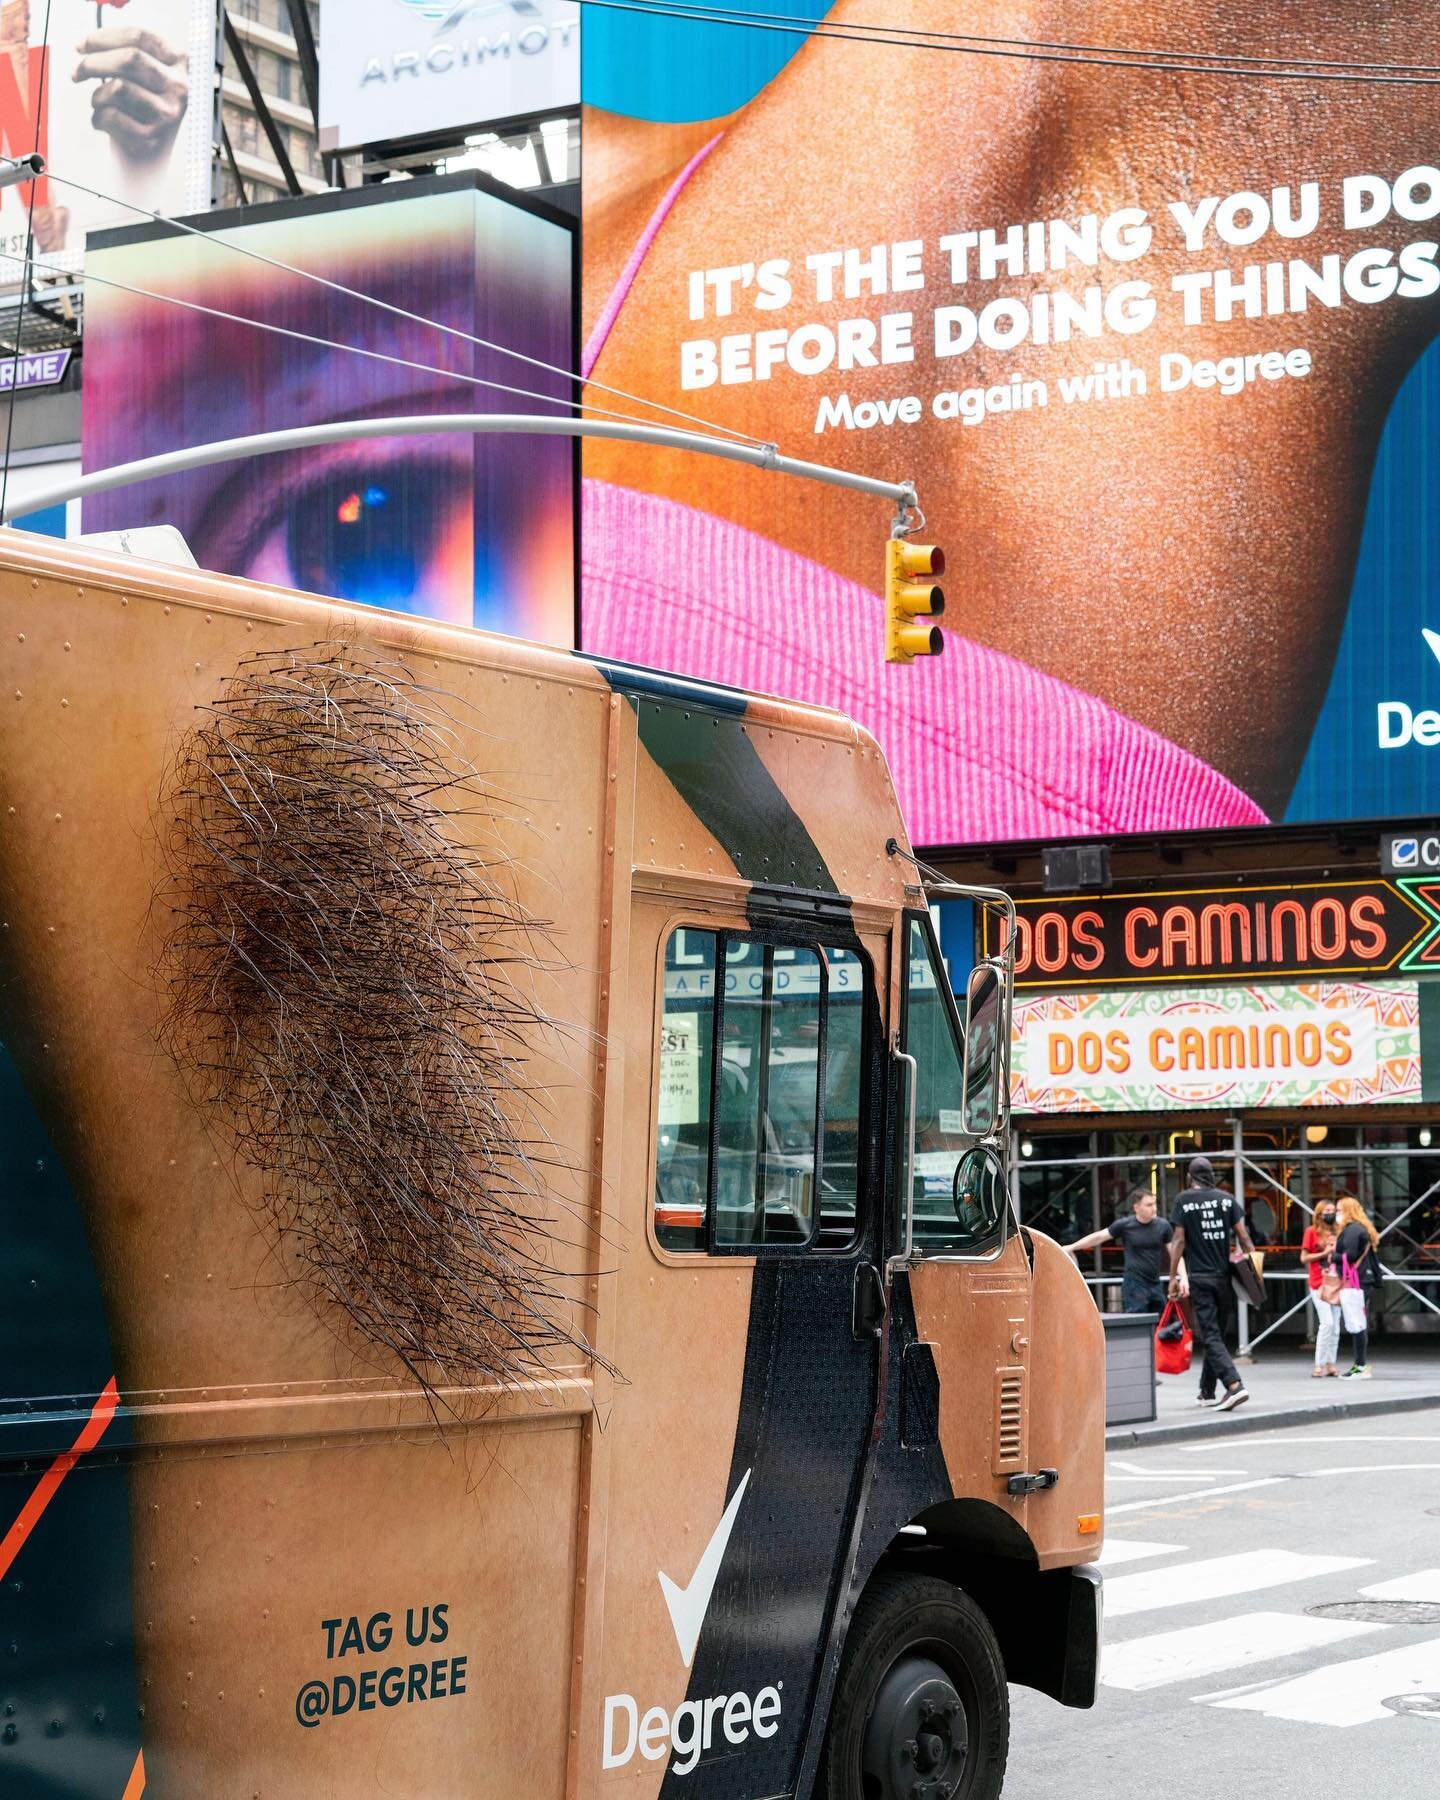 Did you see the Degree truck around NYC this past weekend? You couldn't miss it if you tried! Thank you @invisiblenorth for a fun and wacky project that ended up a team favorite. Tell us how you feel when you see it 😂...
.
.
.
.
.
#standardtransmiss